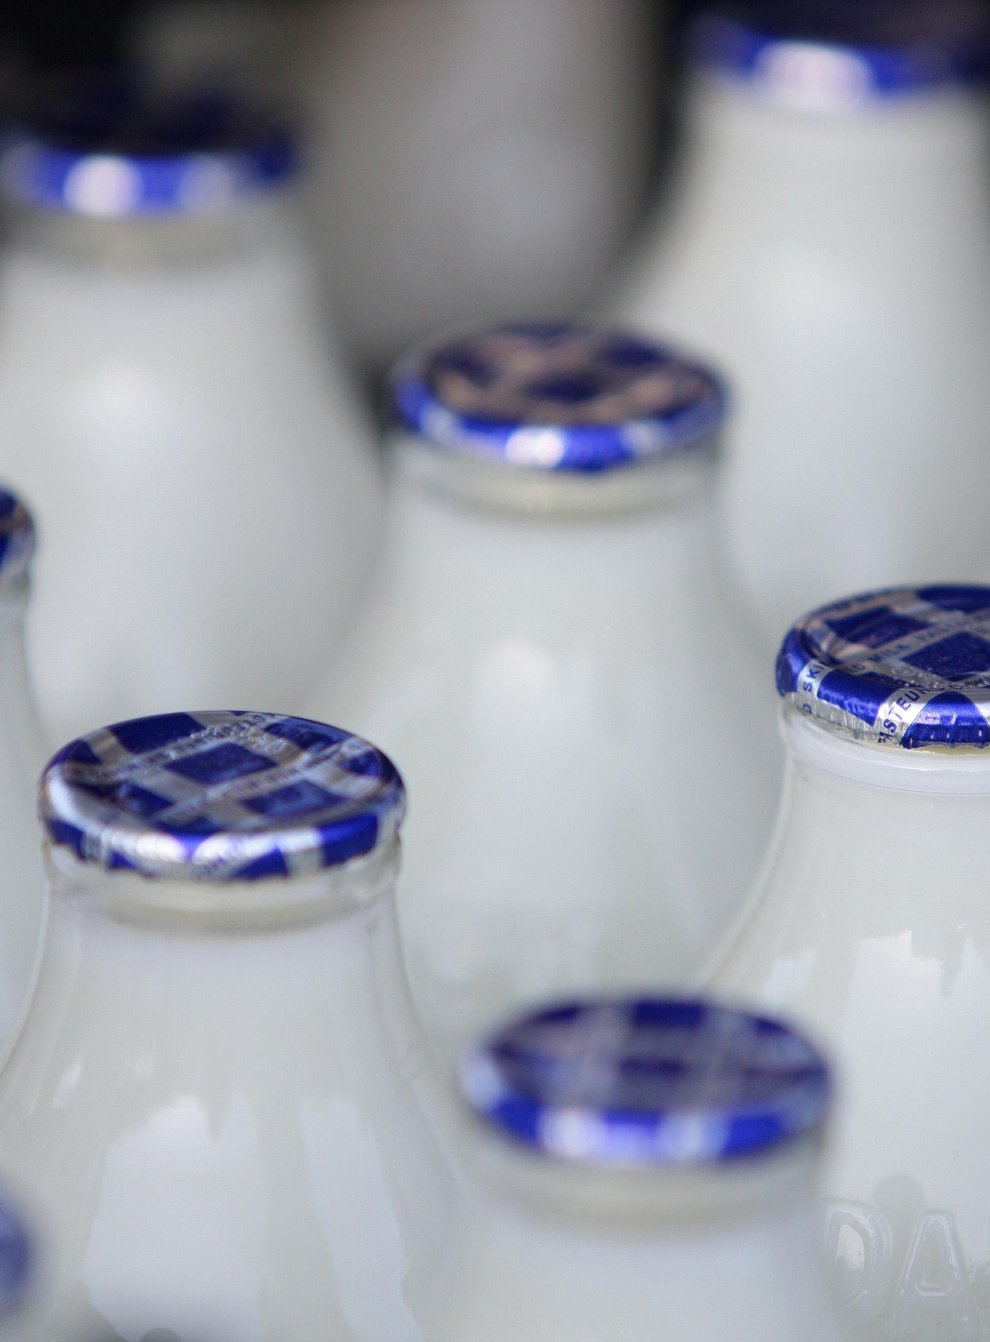 Dairy giant Arla says milk supplies could be disrupted by a lack of lorry drivers (Dave Thompson)